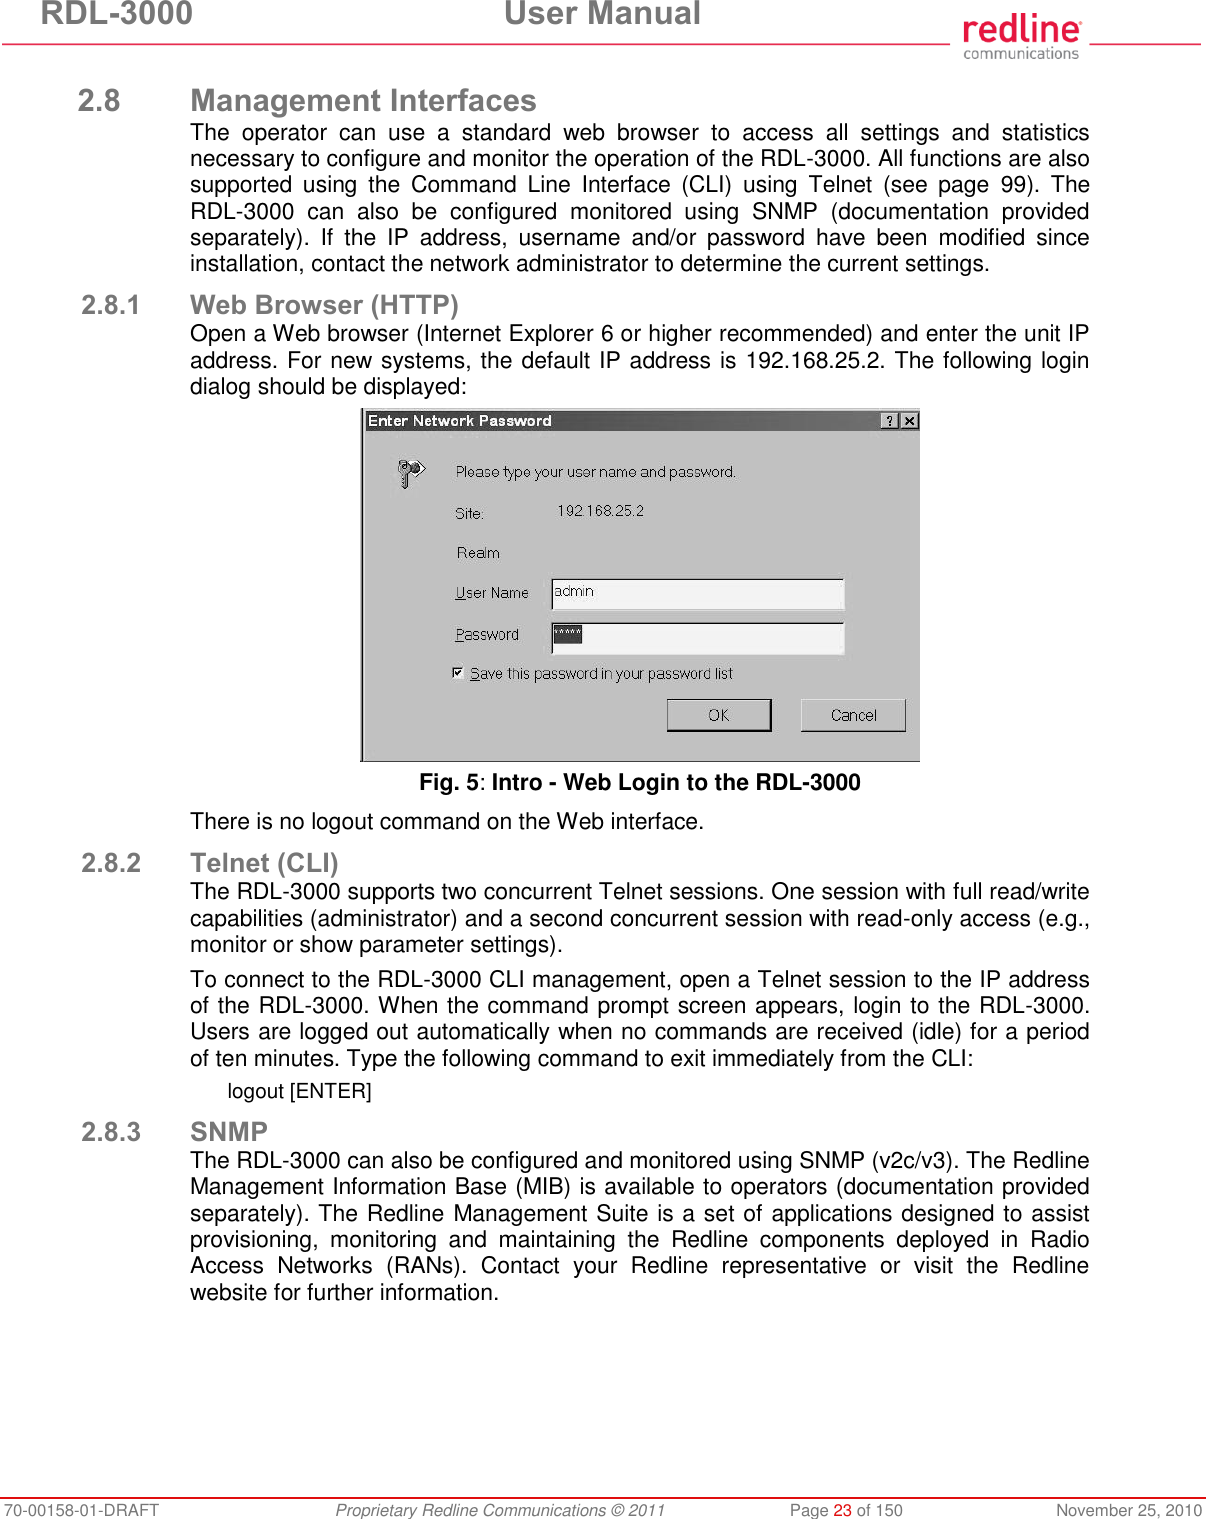 RDL-3000  User Manual 70-00158-01-DRAFT  Proprietary Redline Communications © 2011  Page 23 of 150  November 25, 2010  2.8 Management Interfaces The  operator  can  use  a  standard  web  browser  to  access  all  settings  and  statistics necessary to configure and monitor the operation of the RDL-3000. All functions are also supported  using  the  Command  Line  Interface  (CLI)  using  Telnet  (see  page  99).  The RDL-3000  can  also  be  configured  monitored  using  SNMP  (documentation  provided separately).  If  the  IP  address,  username  and/or  password  have  been  modified  since installation, contact the network administrator to determine the current settings. 2.8.1 Web Browser (HTTP) Open a Web browser (Internet Explorer 6 or higher recommended) and enter the unit IP address. For new systems, the default IP address is 192.168.25.2. The following login dialog should be displayed:  Fig. 5: Intro - Web Login to the RDL-3000 There is no logout command on the Web interface. 2.8.2 Telnet (CLI) The RDL-3000 supports two concurrent Telnet sessions. One session with full read/write capabilities (administrator) and a second concurrent session with read-only access (e.g., monitor or show parameter settings). To connect to the RDL-3000 CLI management, open a Telnet session to the IP address of the RDL-3000. When the command prompt screen appears, login to the RDL-3000. Users are logged out automatically when no commands are received (idle) for a period of ten minutes. Type the following command to exit immediately from the CLI: logout [ENTER] 2.8.3 SNMP The RDL-3000 can also be configured and monitored using SNMP (v2c/v3). The Redline Management Information Base (MIB) is available to operators (documentation provided separately). The Redline Management Suite is a set of applications designed to assist provisioning,  monitoring  and  maintaining  the  Redline  components  deployed  in  Radio Access  Networks  (RANs).  Contact  your  Redline  representative  or  visit  the  Redline website for further information. 